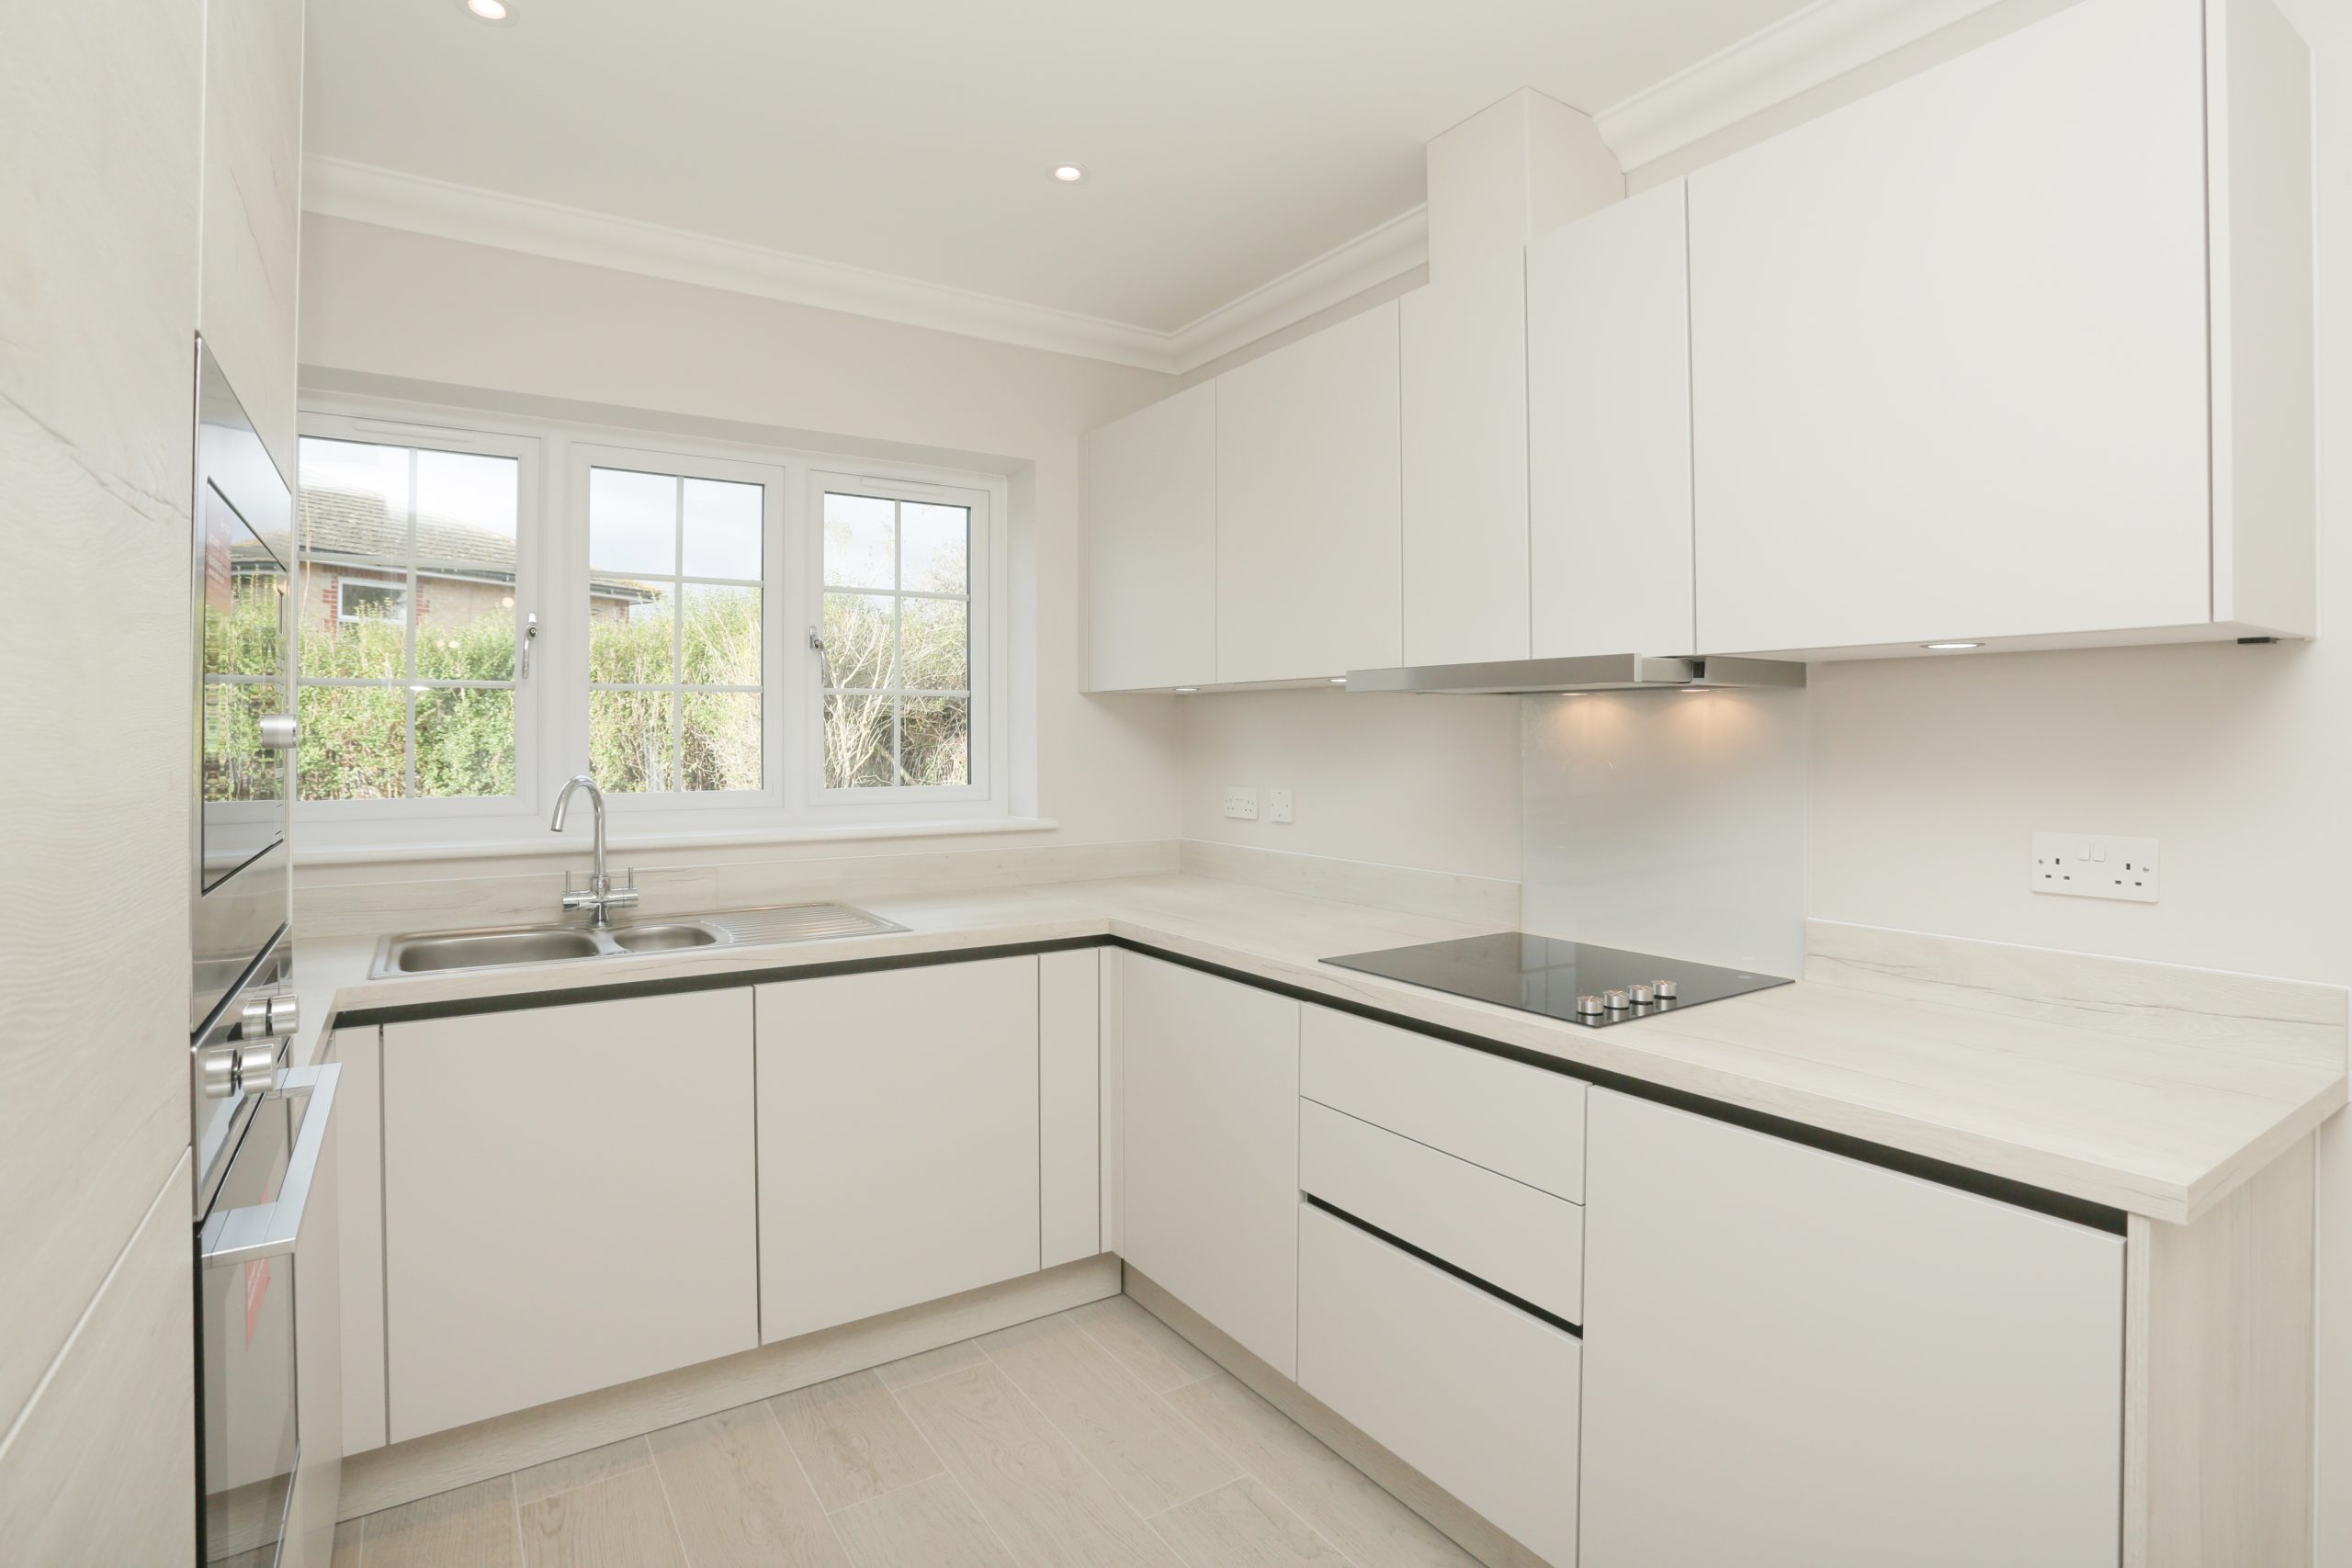 Fitted kitchen at our Ivy Court development